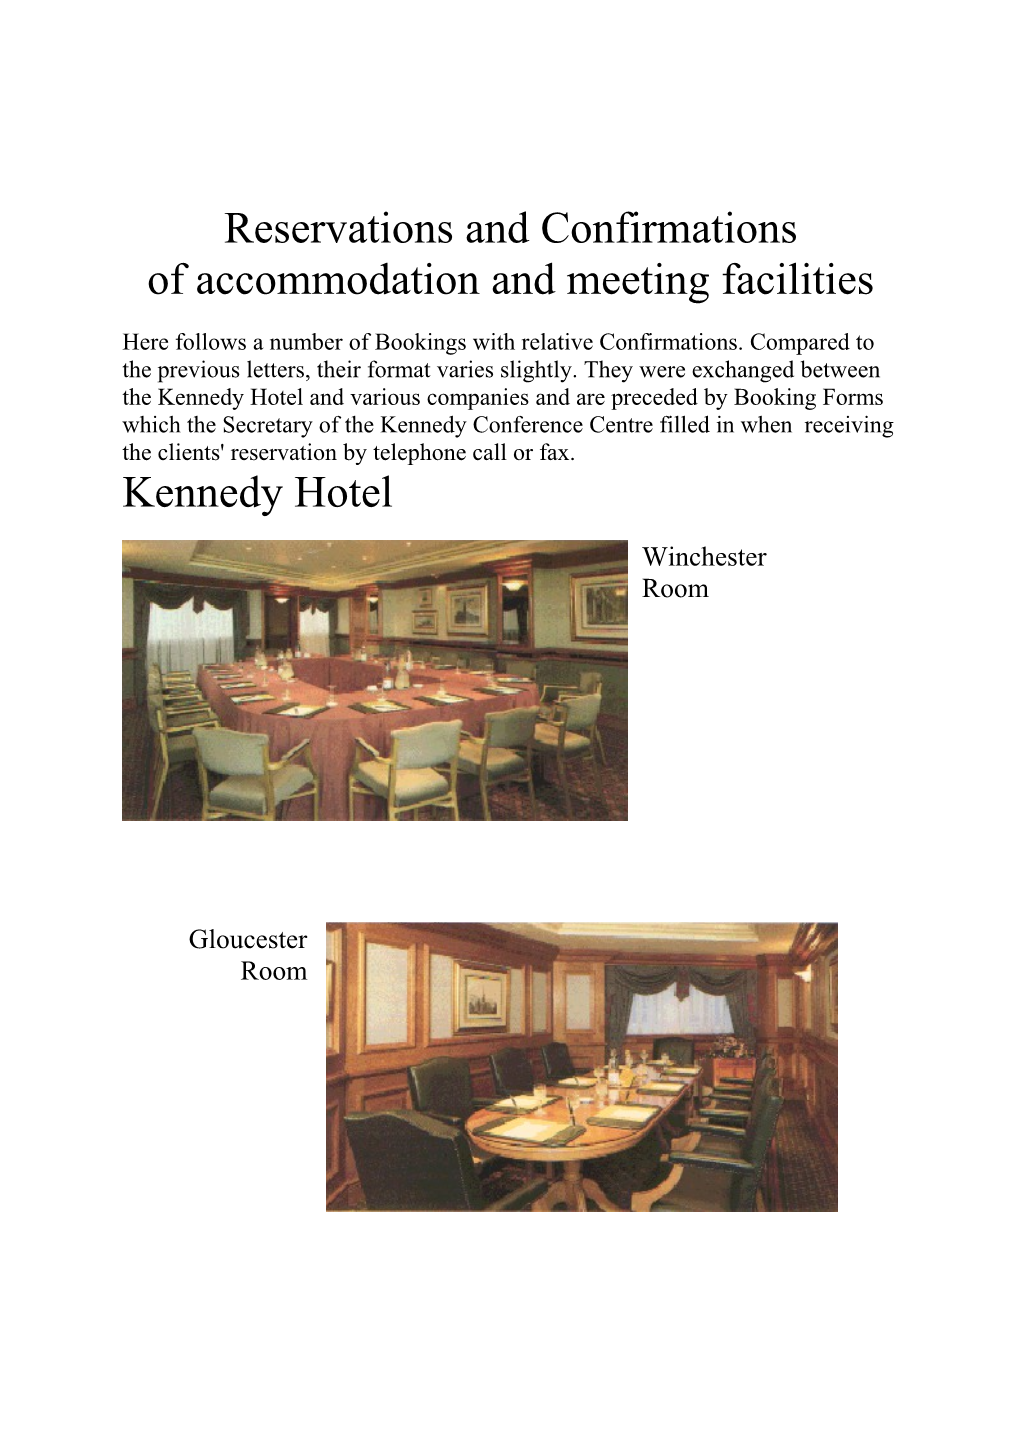 Reservations of Accommodation and Meeting Facilities